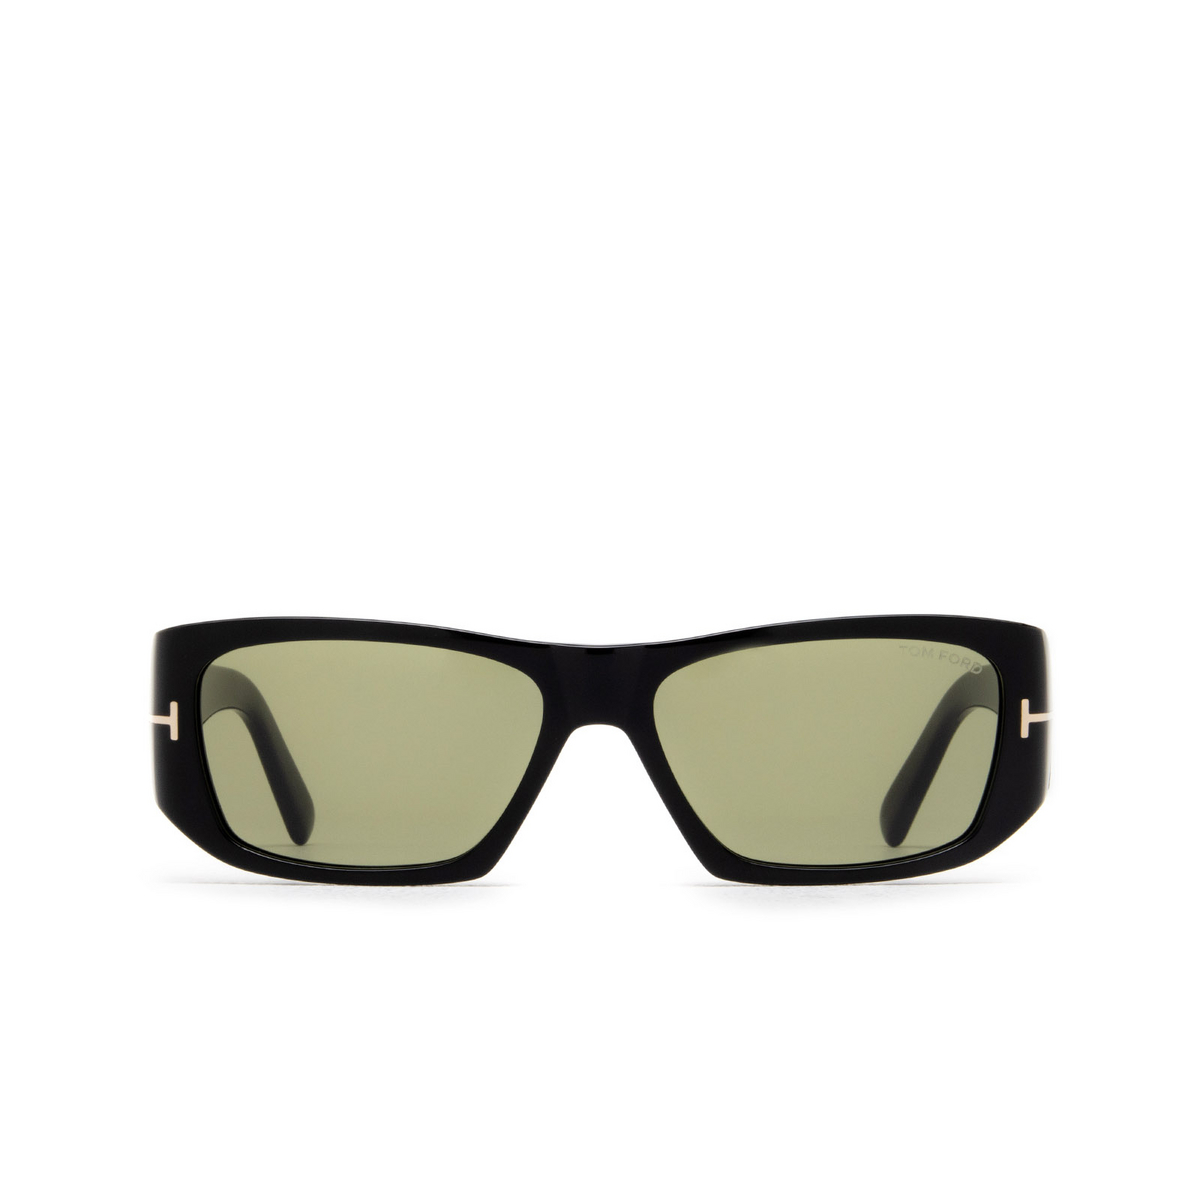 Tom Ford ANDRES-02 Sunglasses 01N Black - front view